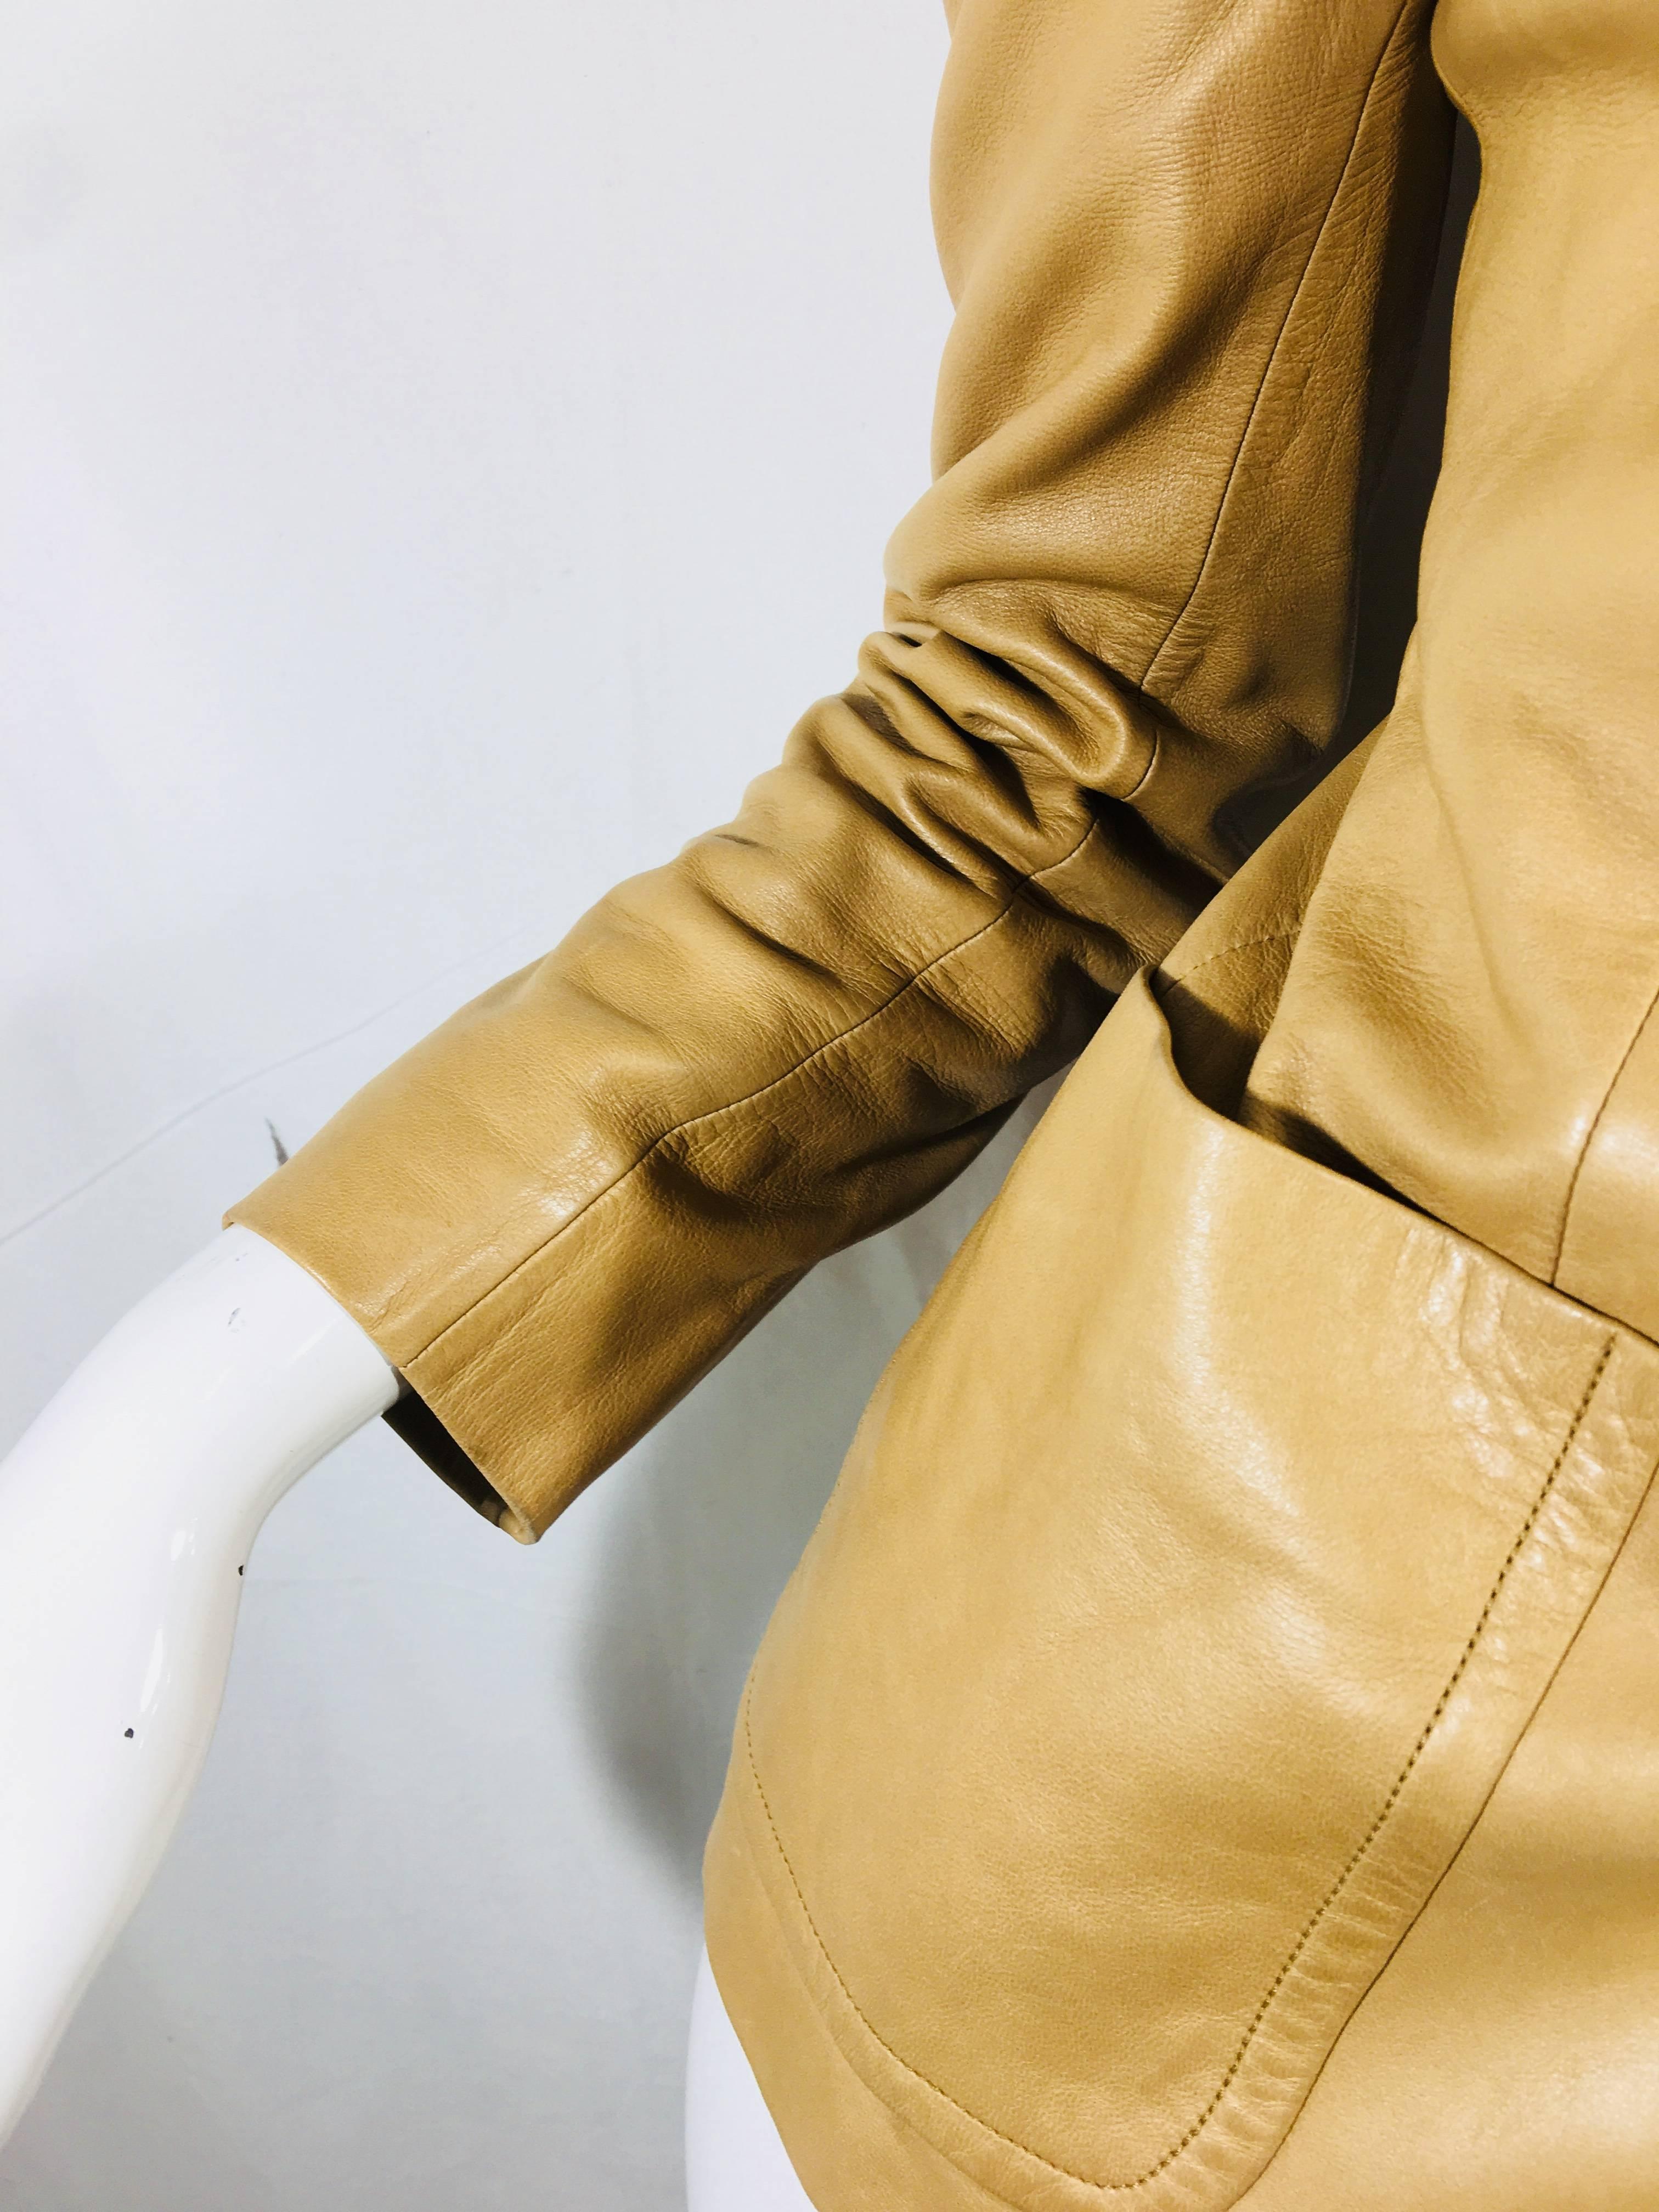 Celine Lamb Leather Jacket. Button Up Blazer Style with Dual Patch Pockets.